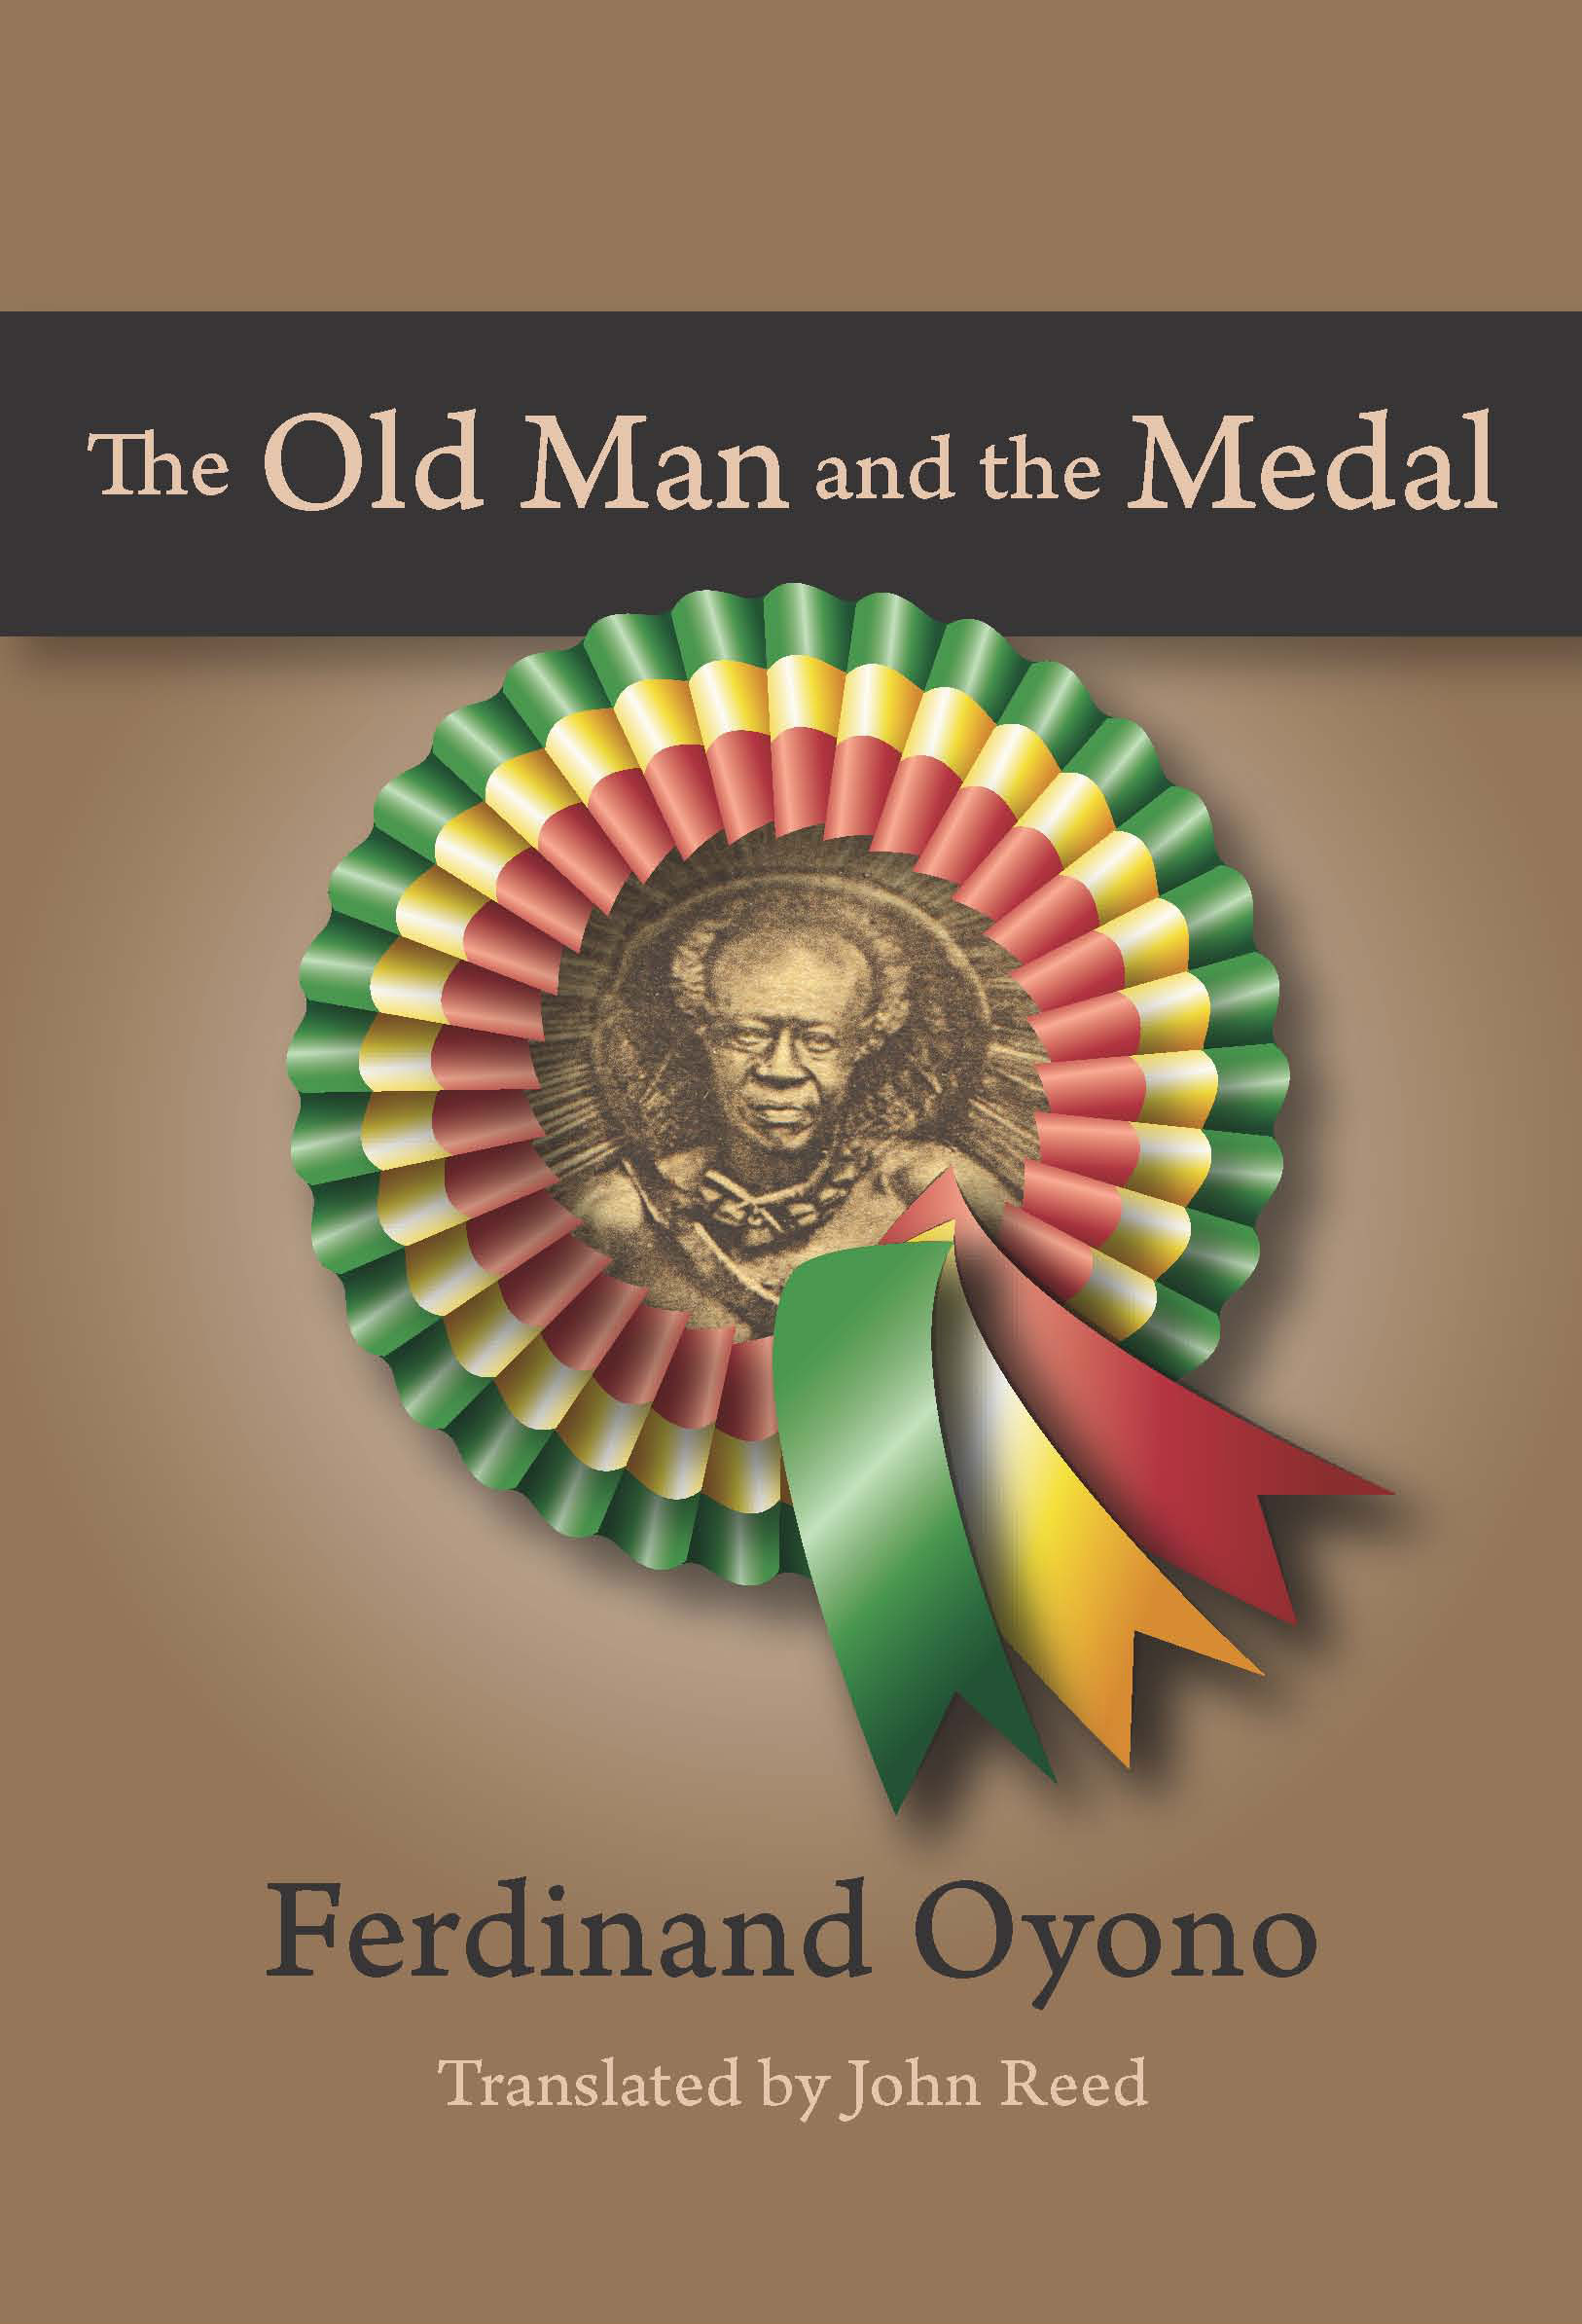 The Old Man and the Medal:  by Ferdinand  Oyono (translated by John  Reed)